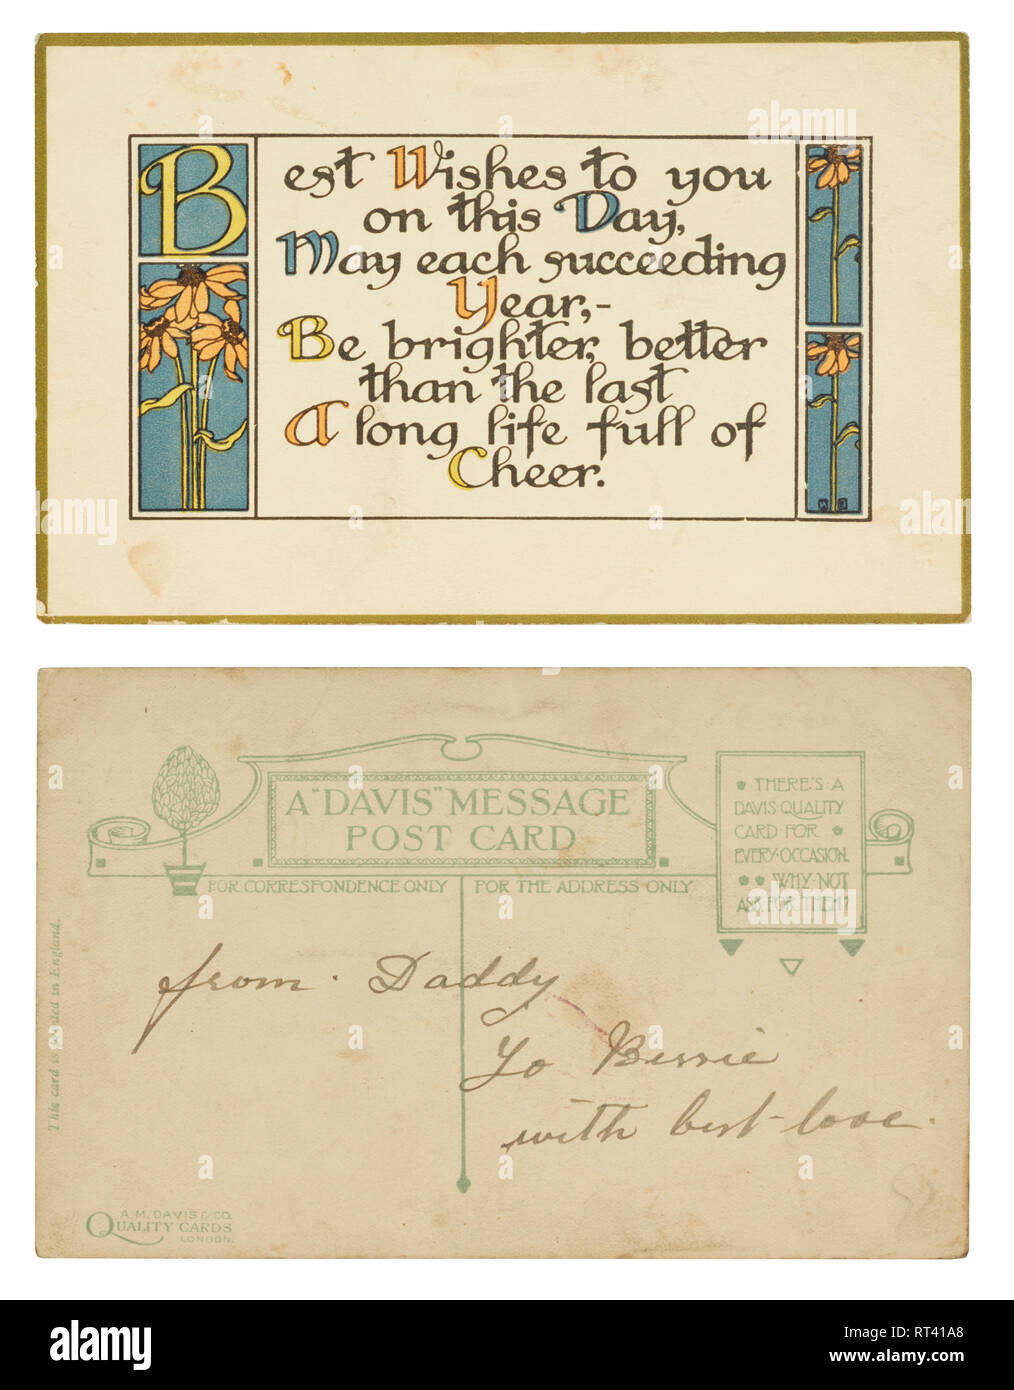 A birthday wishes postcard from about 1915 from Daddy to Bessie with love Stock Photo